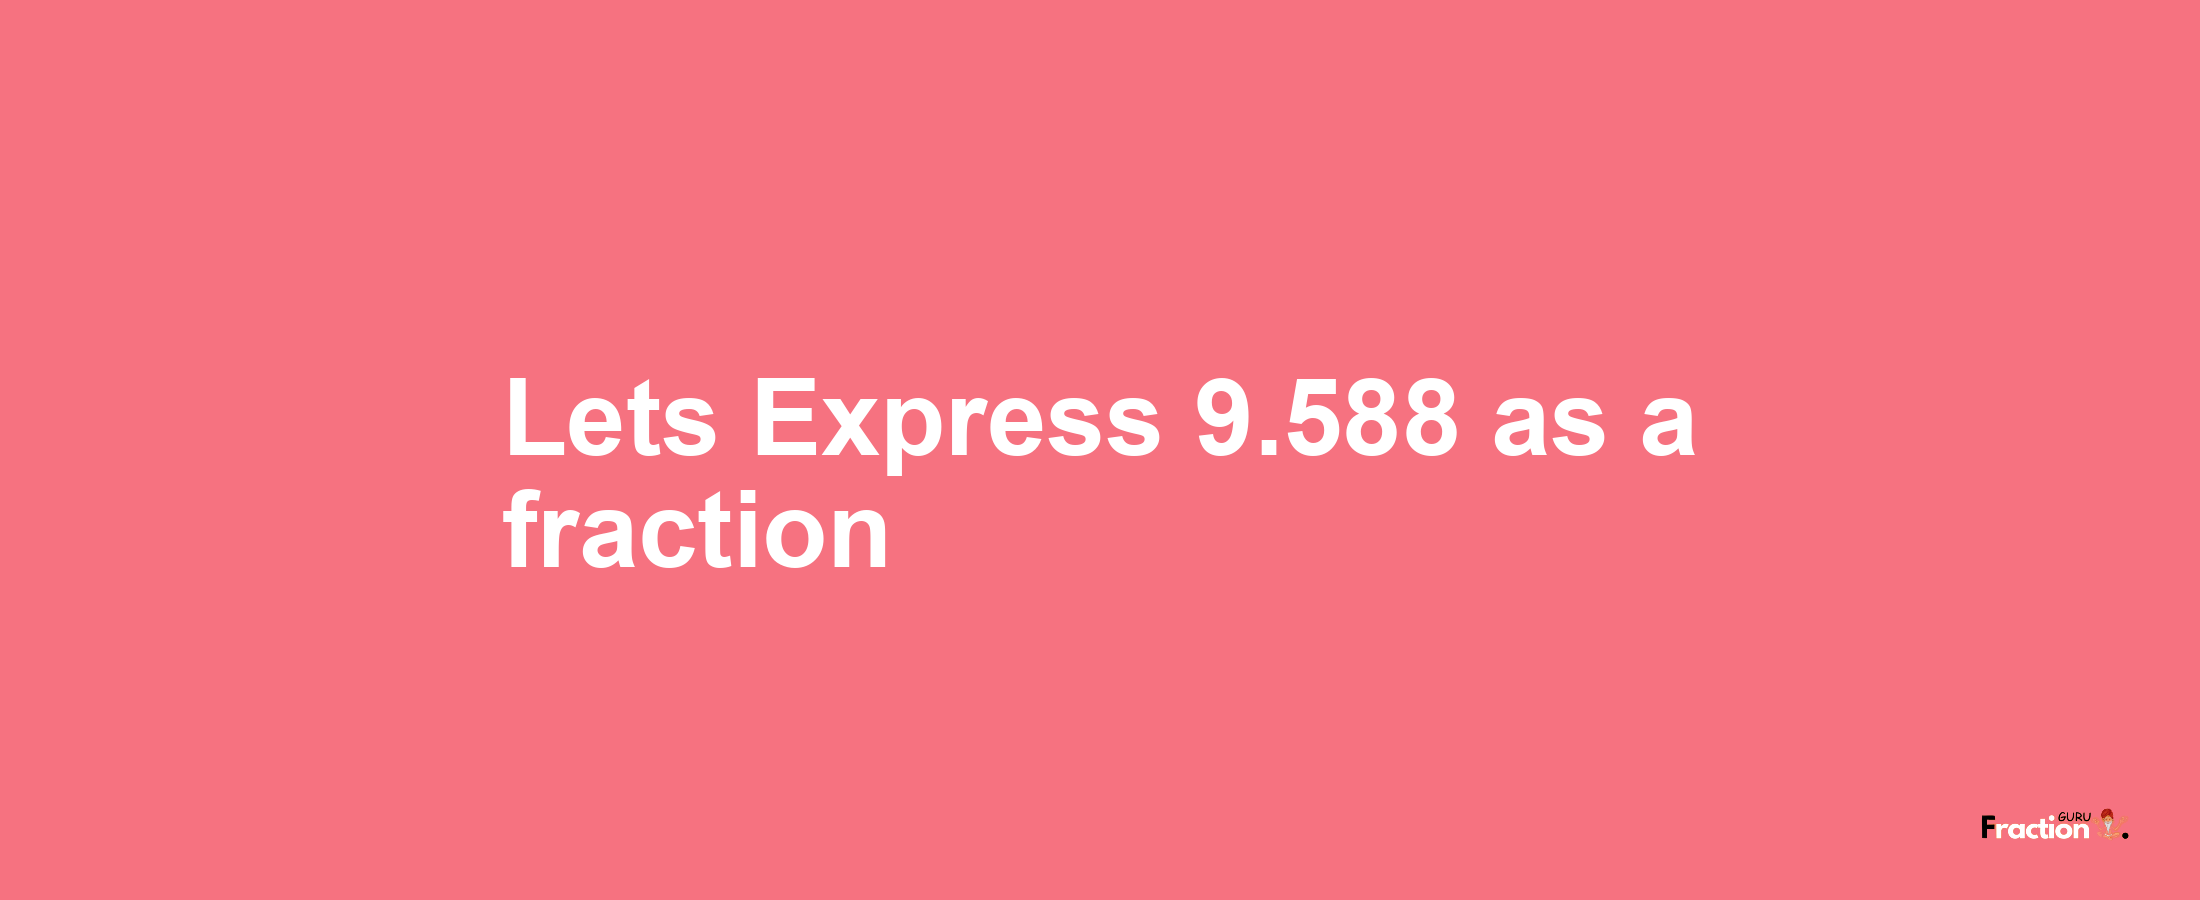 Lets Express 9.588 as afraction